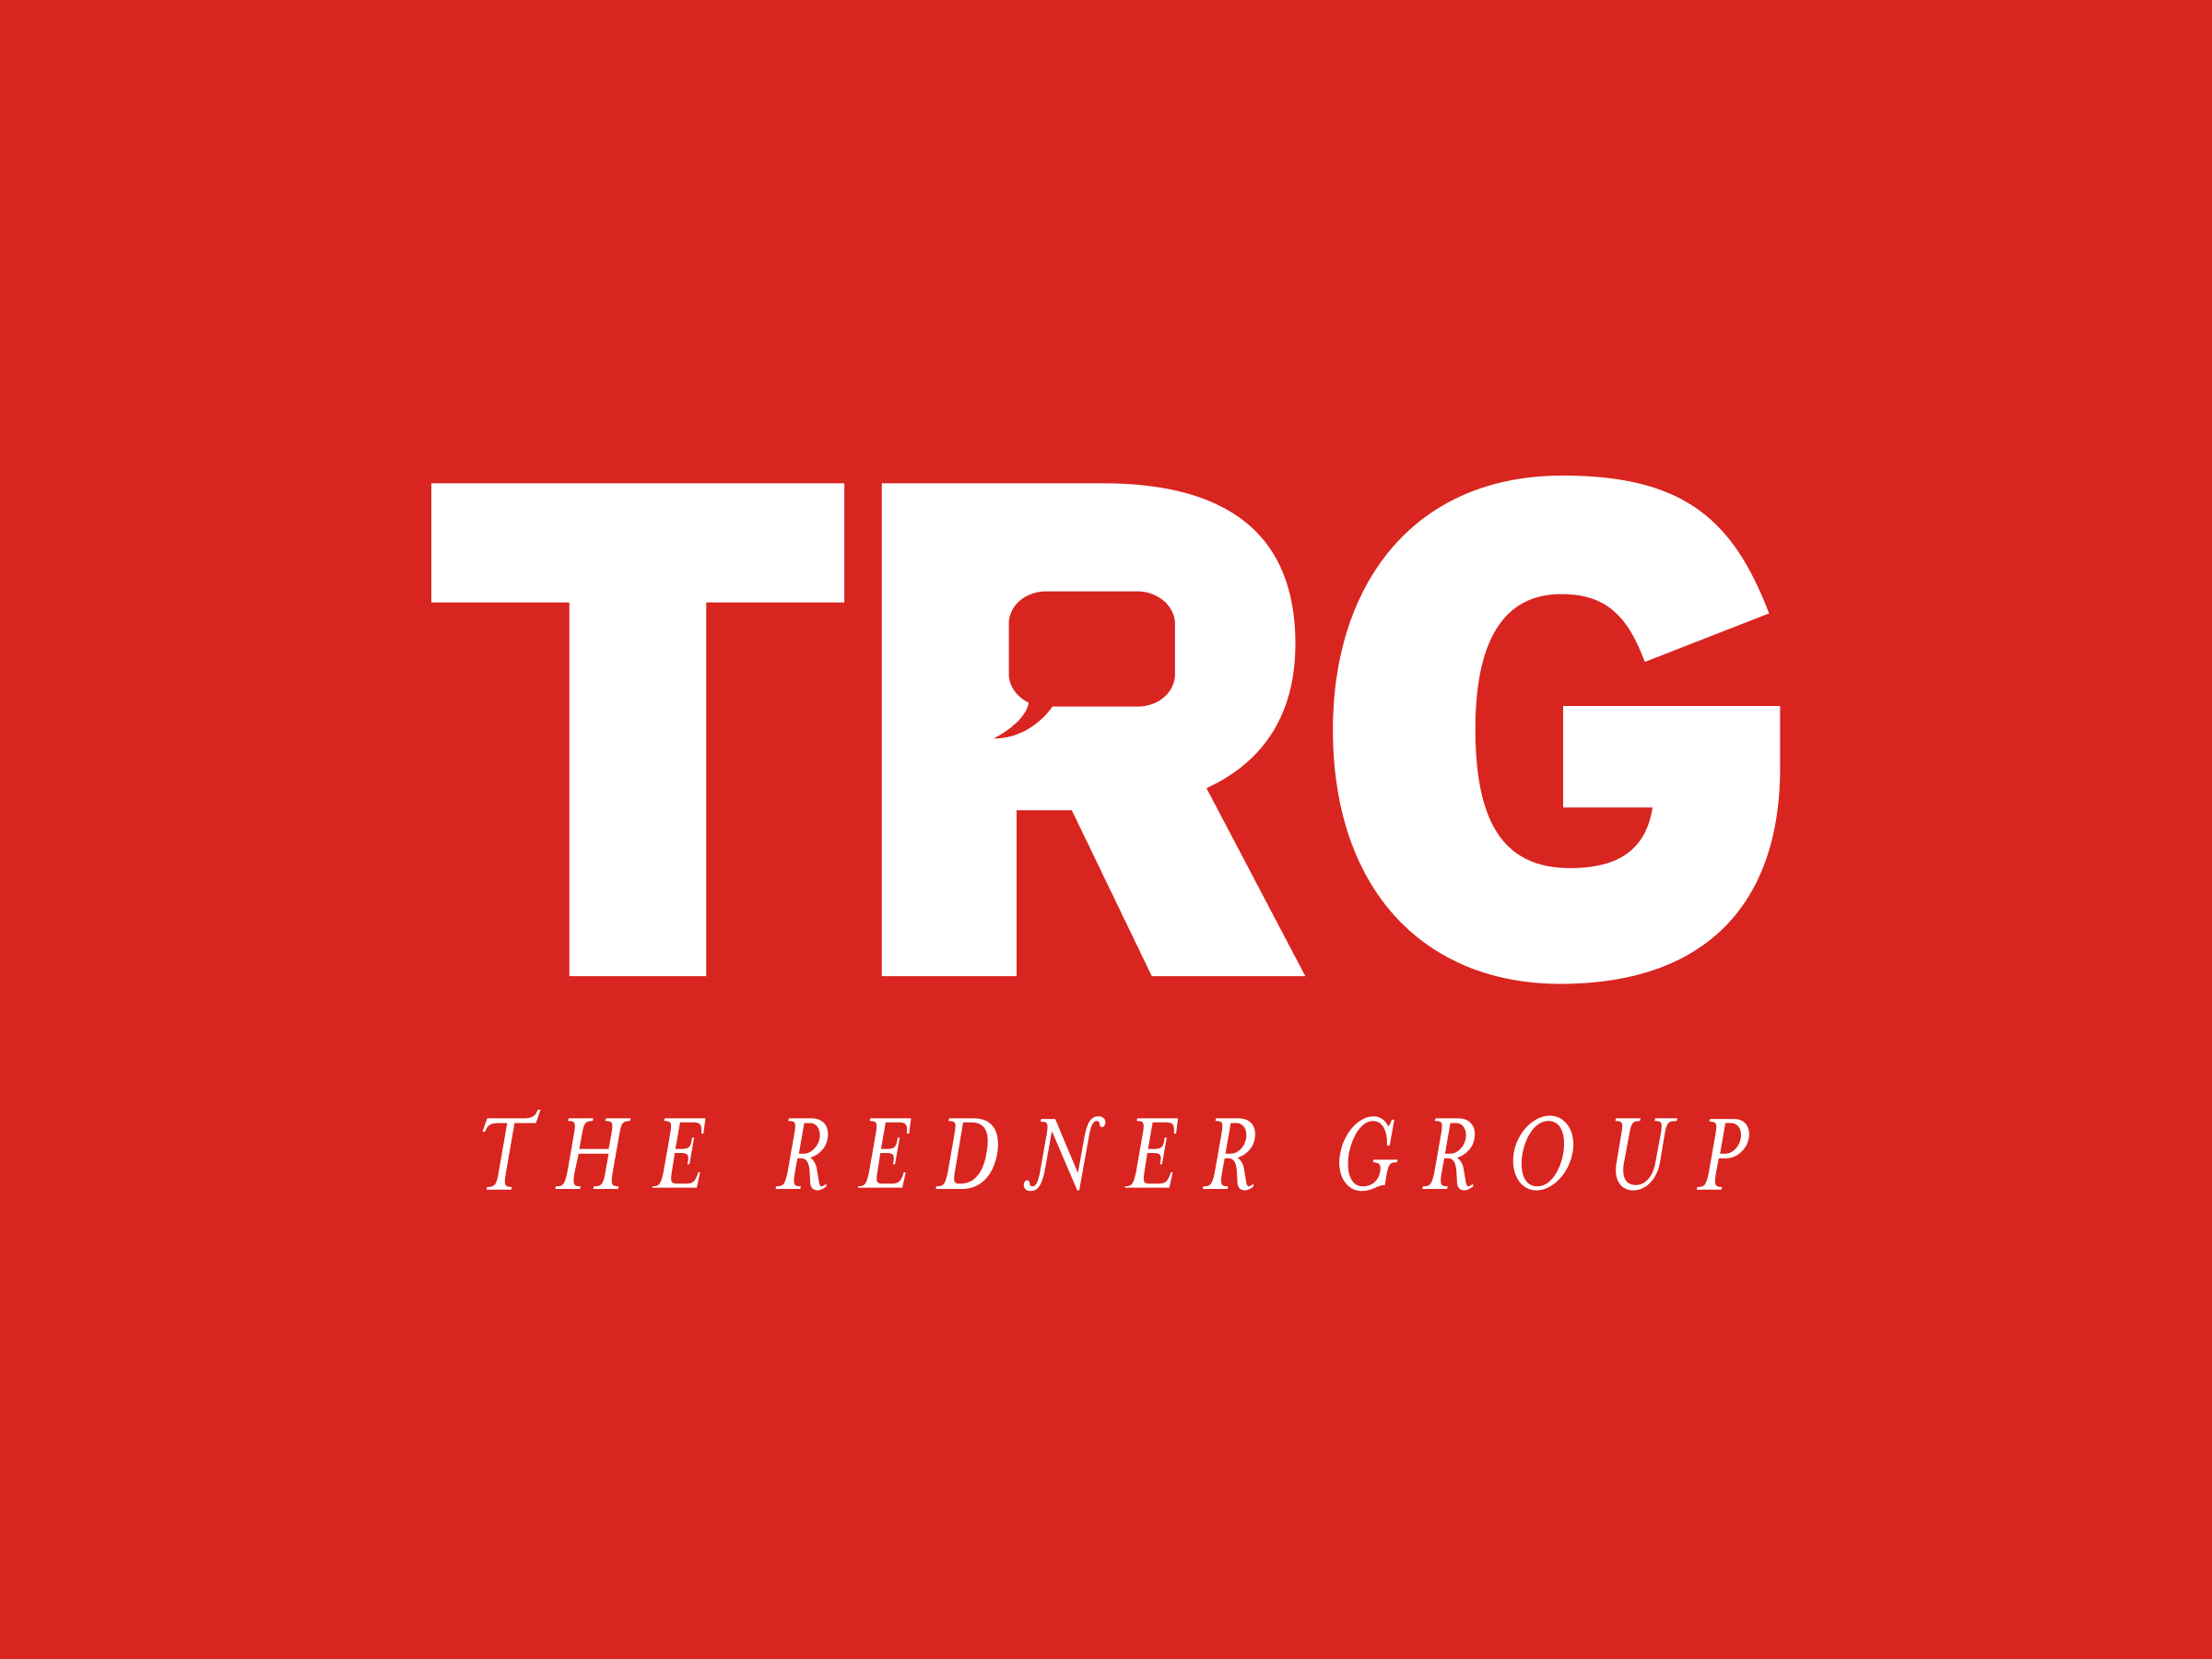 The Redner Group (Proposal)